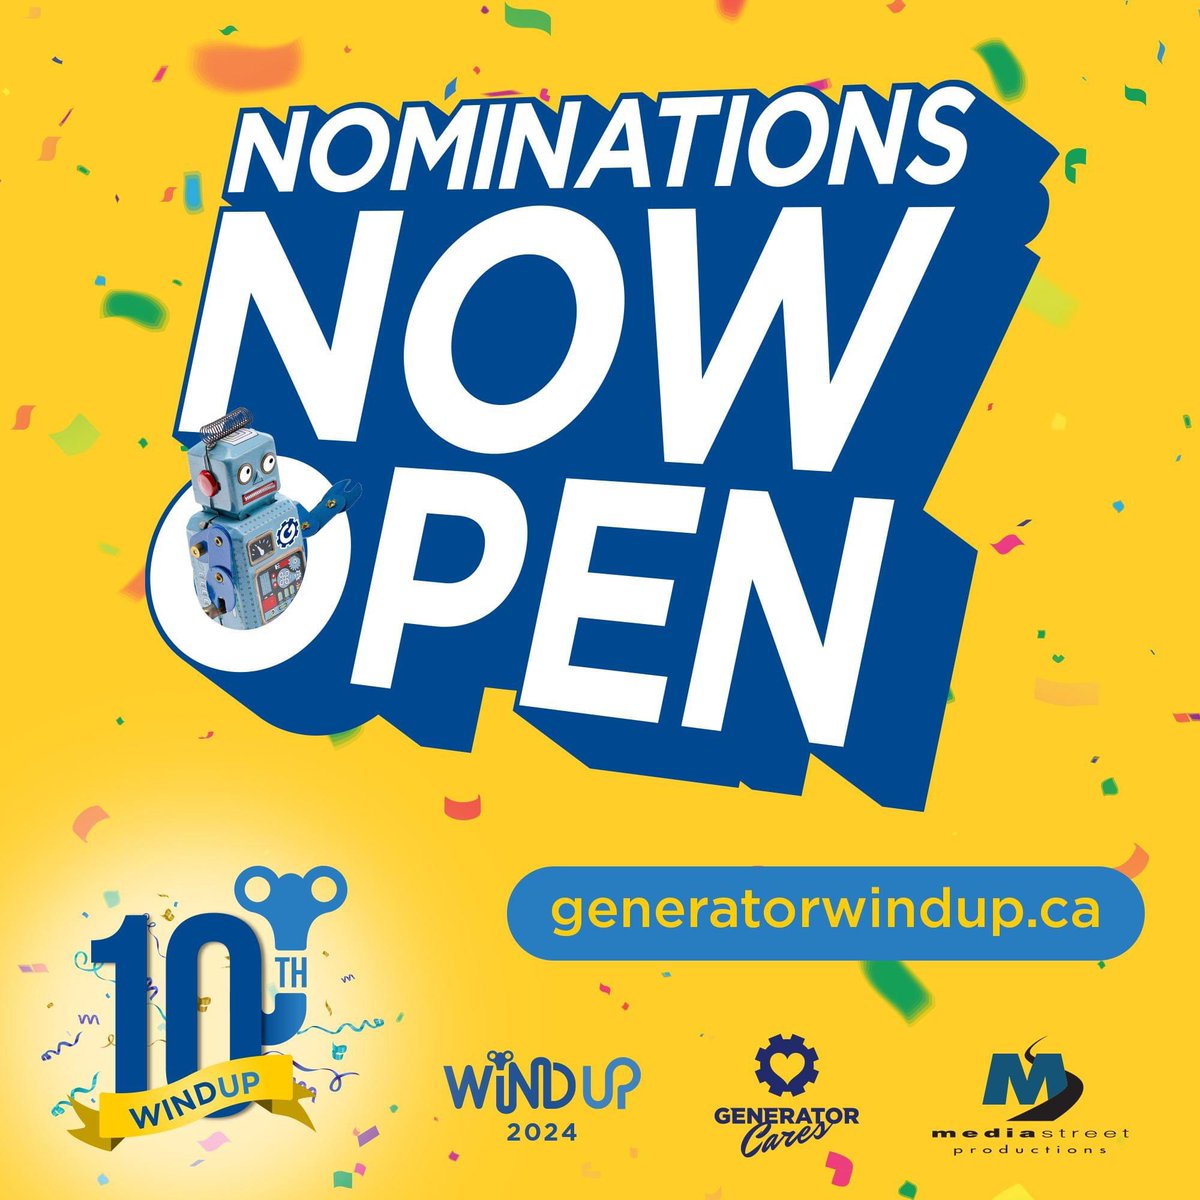 WindUp 2024 is here! Do you know a local business or organization, or are you one, that could benefit from a brand makeover? Nominate them for a chance to win $20,000 in creative and video services from @generatordesign & @MediaStreetProd. Enter now ➡️ generatorwindup.ca